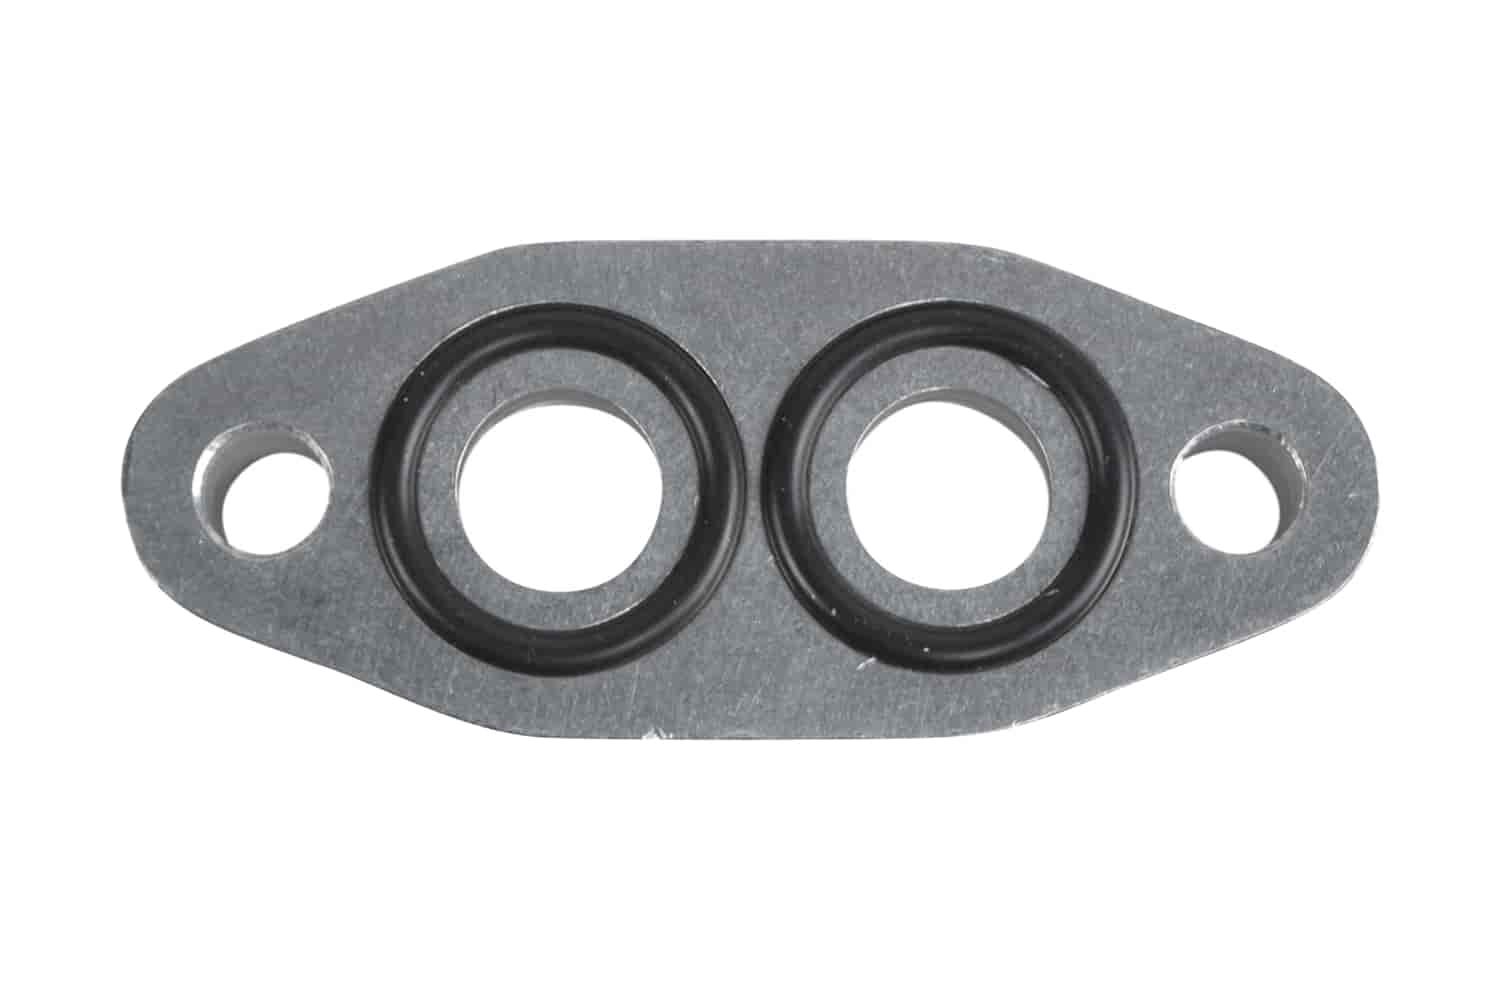 LS Oil Pan Adapter for Oil Cooler